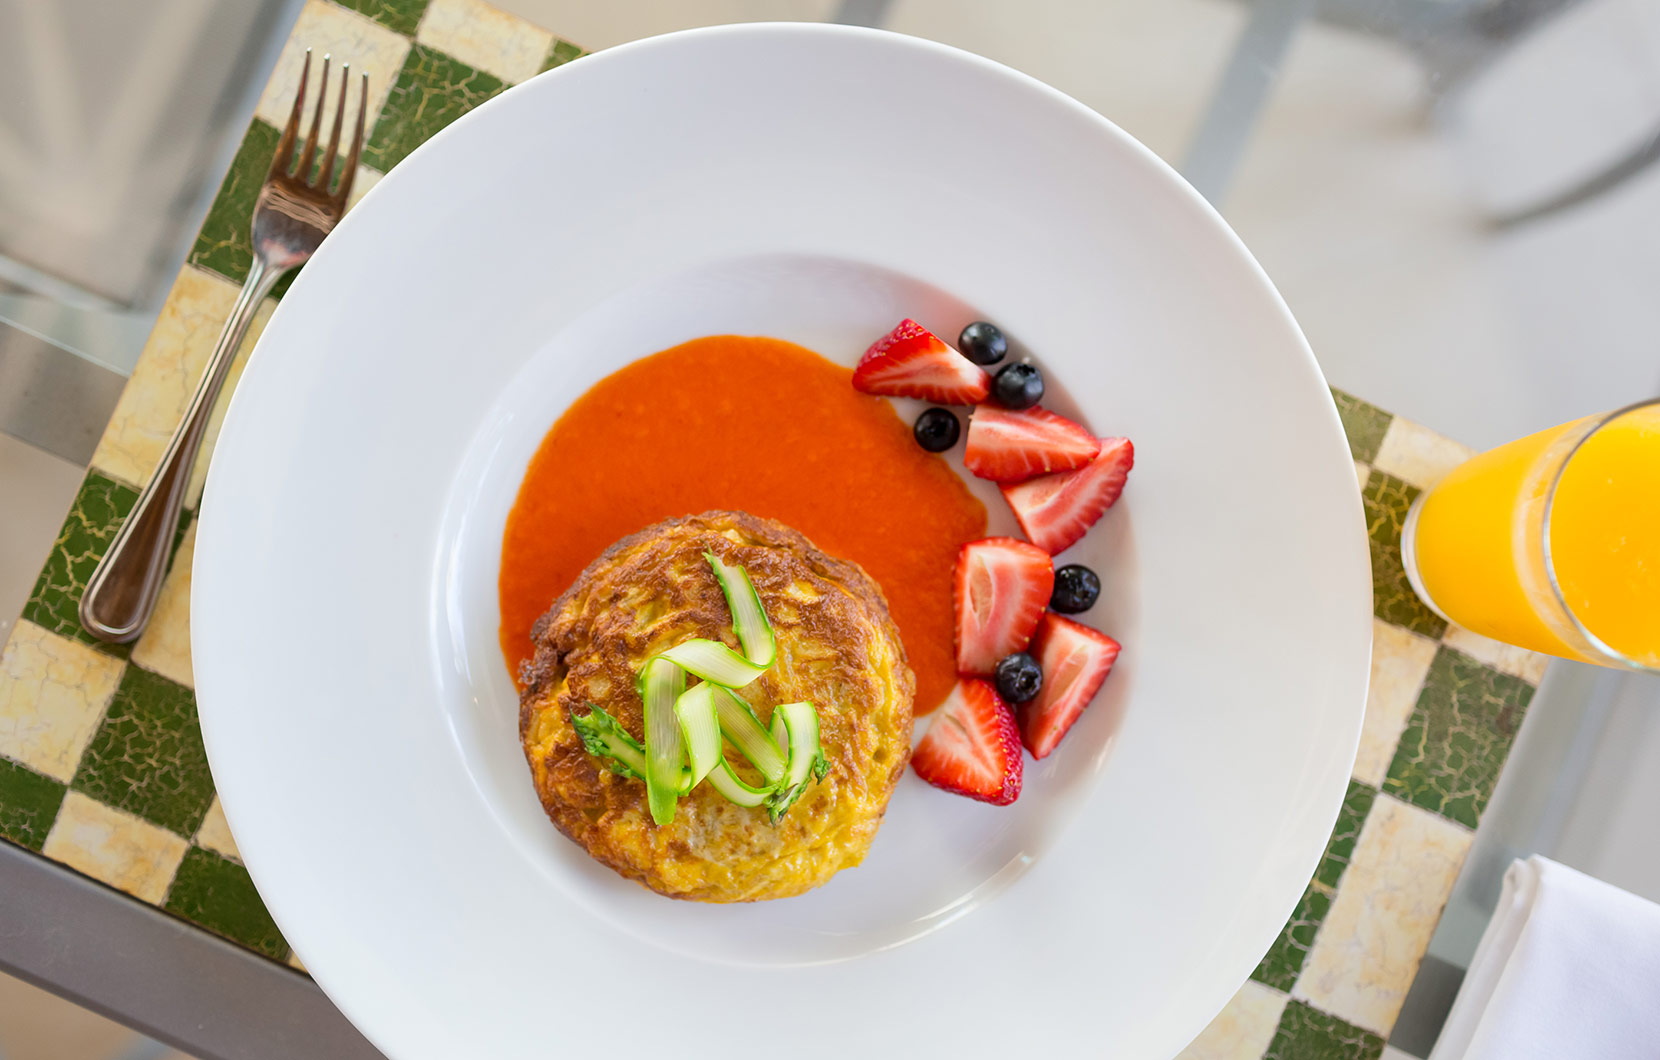 Spanish tortilla with tomato coulis, a side of fresh berries, and a just-squeezed juice.